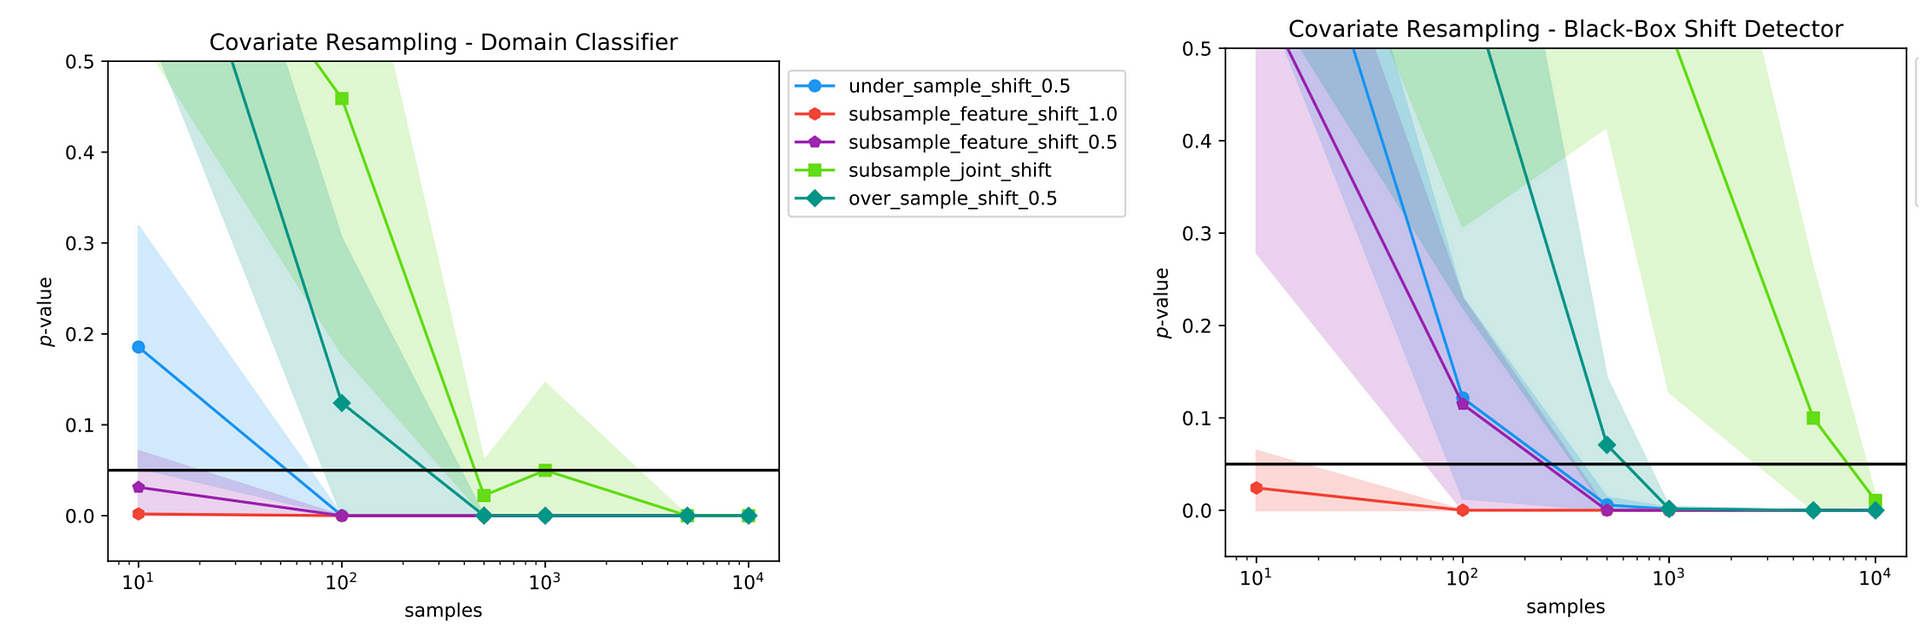 Drift detection results on a set of covariate resampling shifts